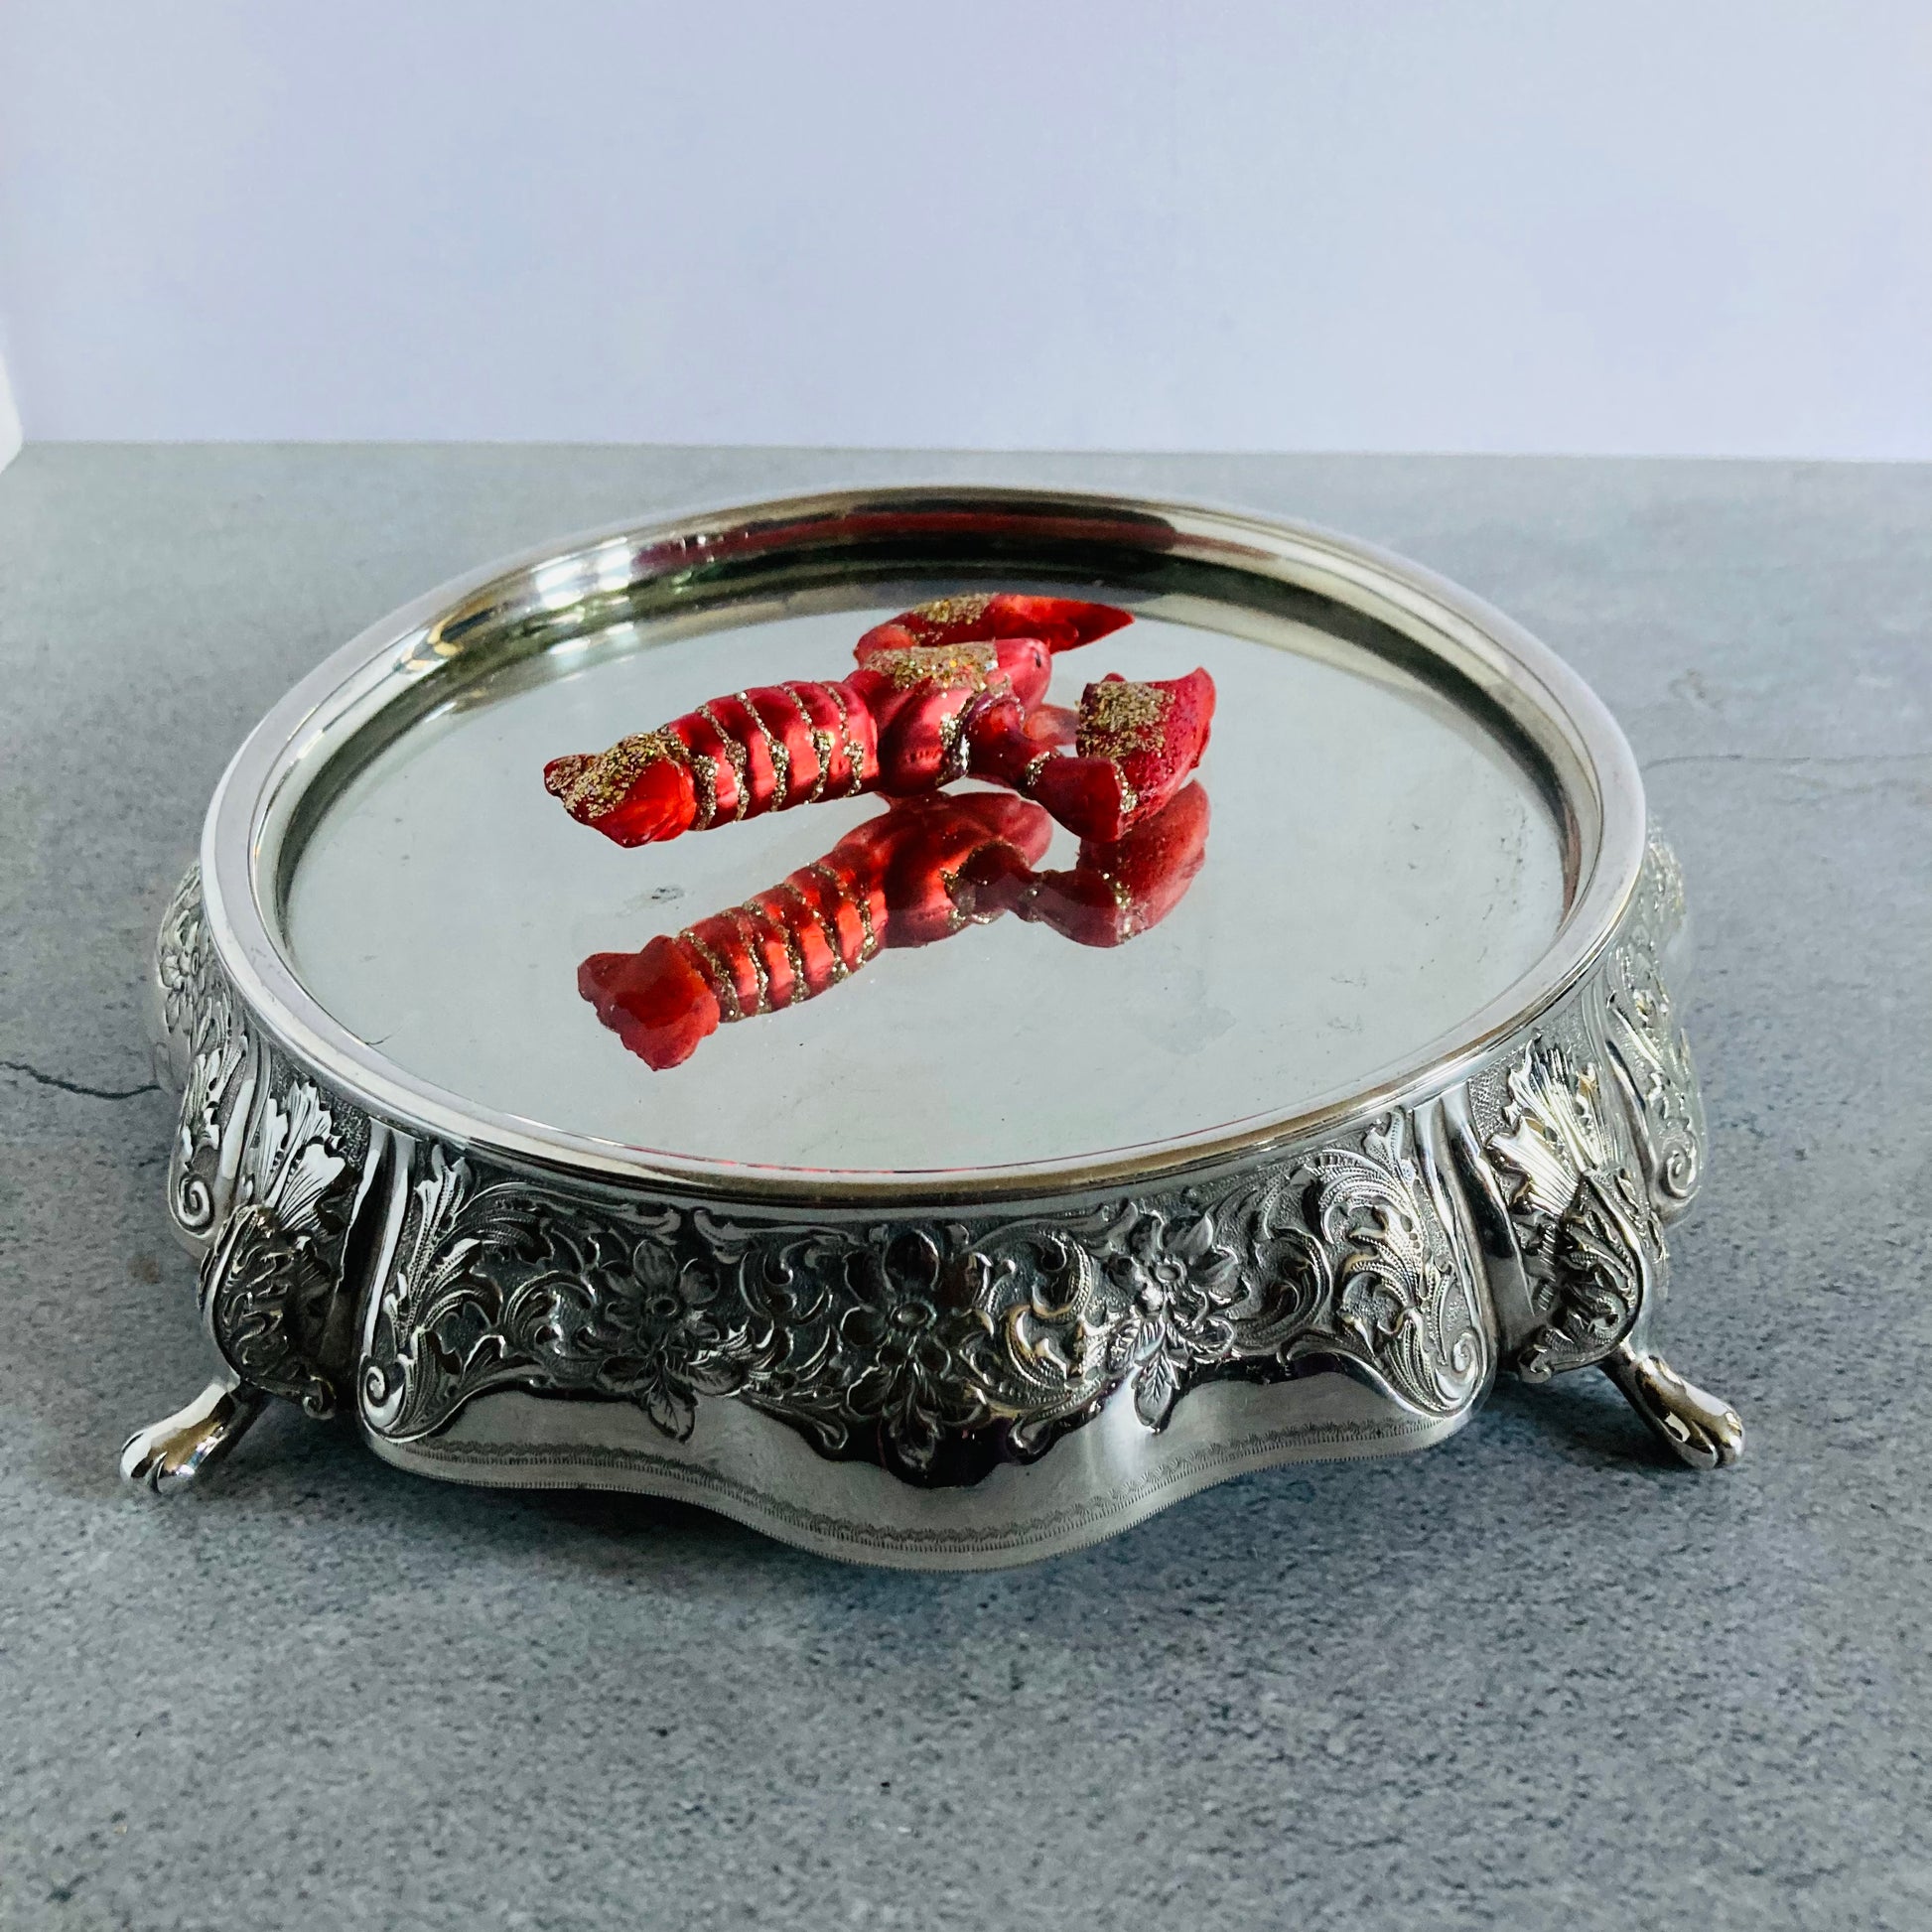 Antique Silver Plated Mirror Tray Plateau Display Piece